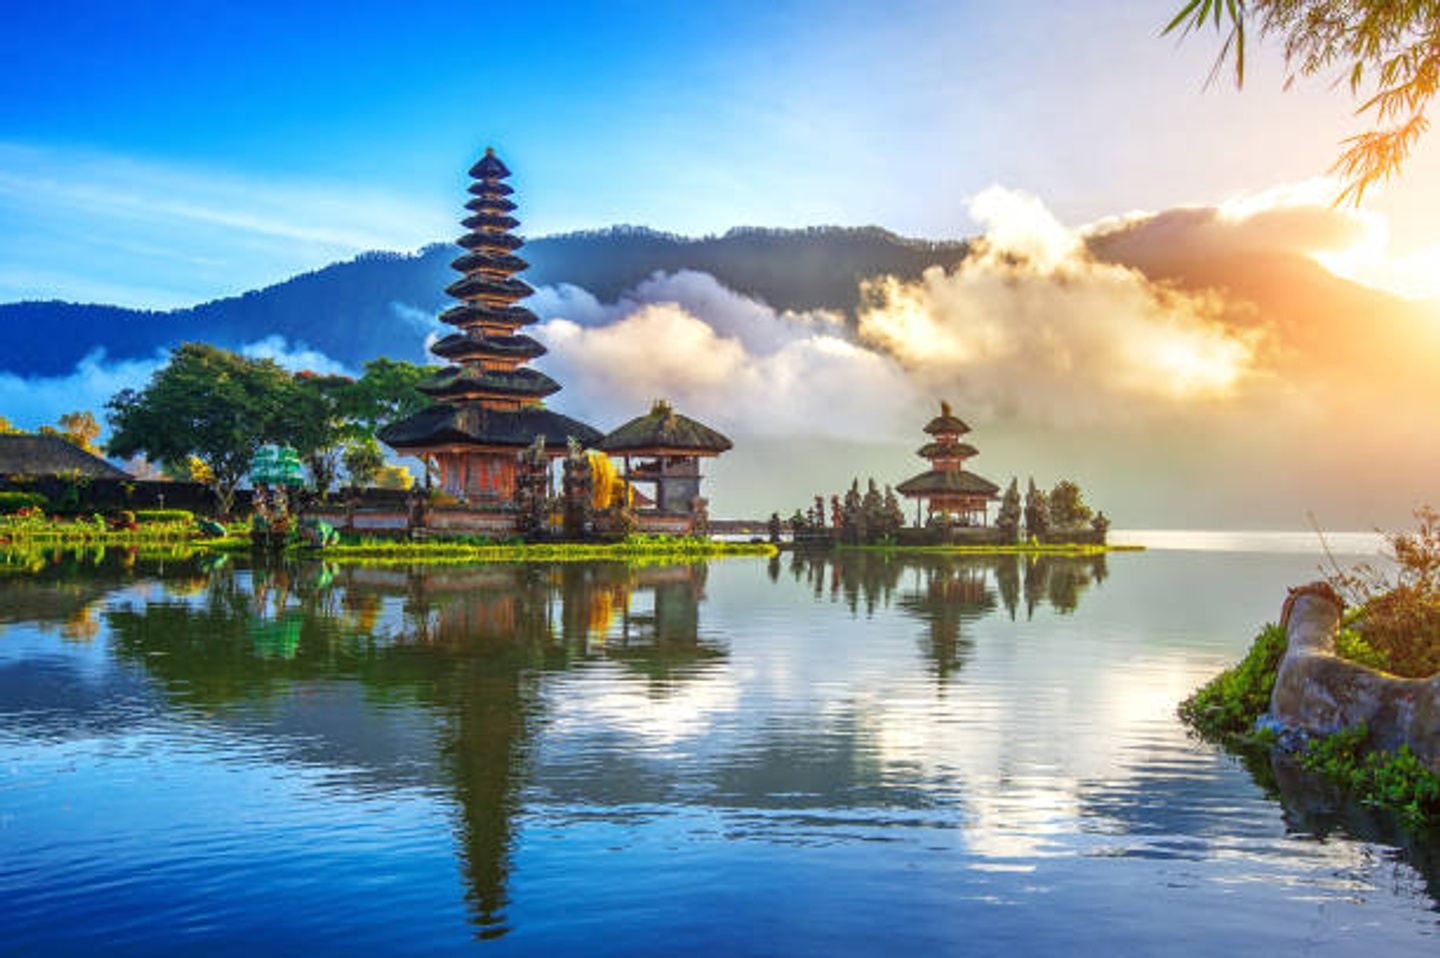 Falling in Love With Bali